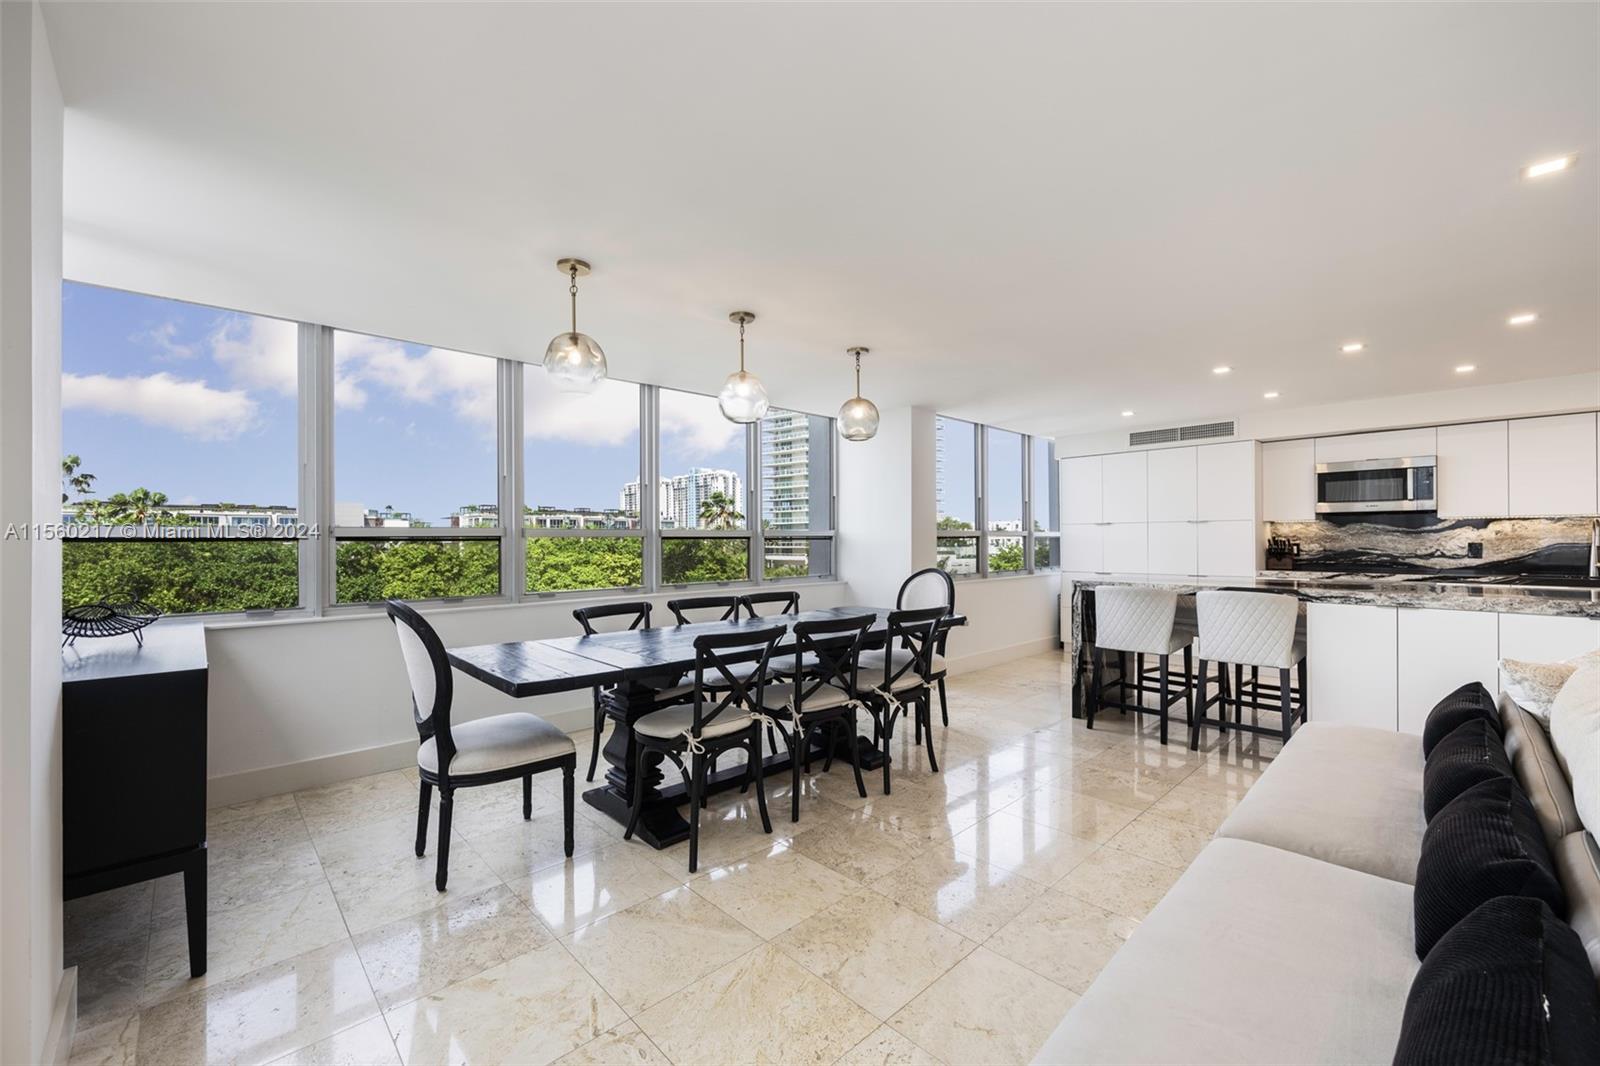 11 Island Ave Unit 411, Miami Beach, Florida, 33139, United States, 2 Bedrooms Bedrooms, ,3 BathroomsBathrooms,Residential,For Sale,11 Island Ave Unit 411,1498844